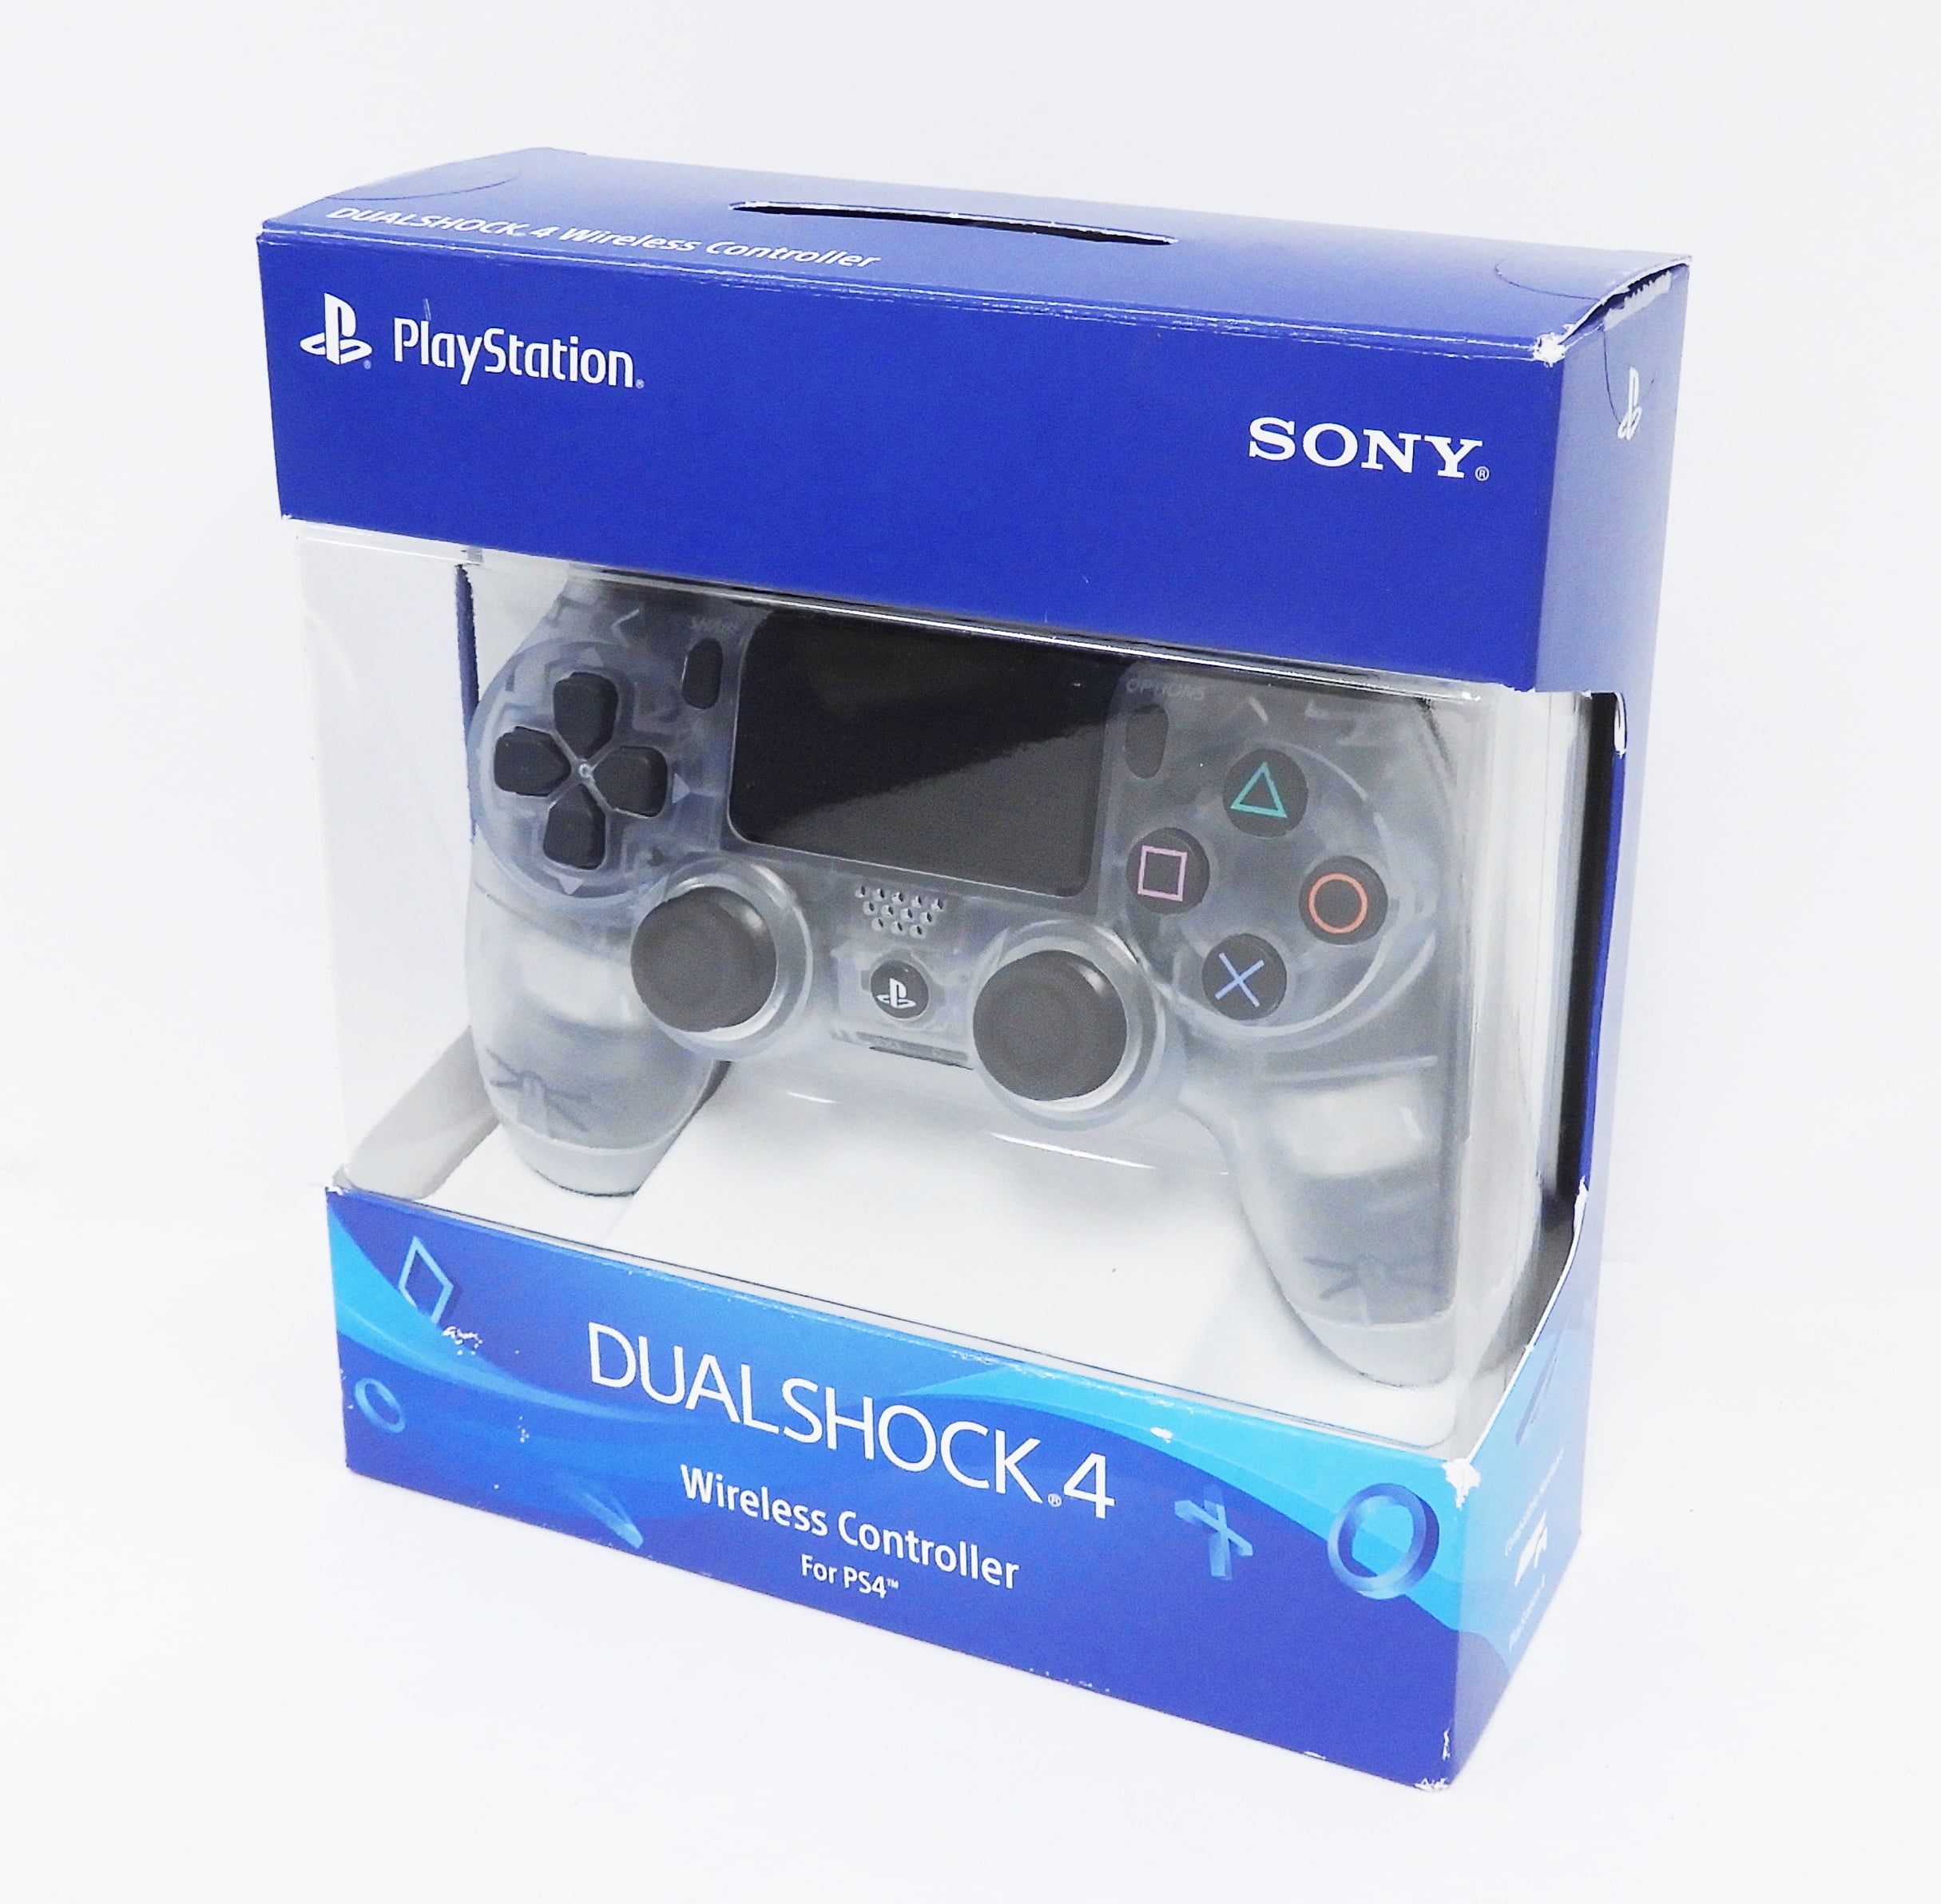 Refurbished Sony DualShock 4 Wireless Controller for PlayStation 4 